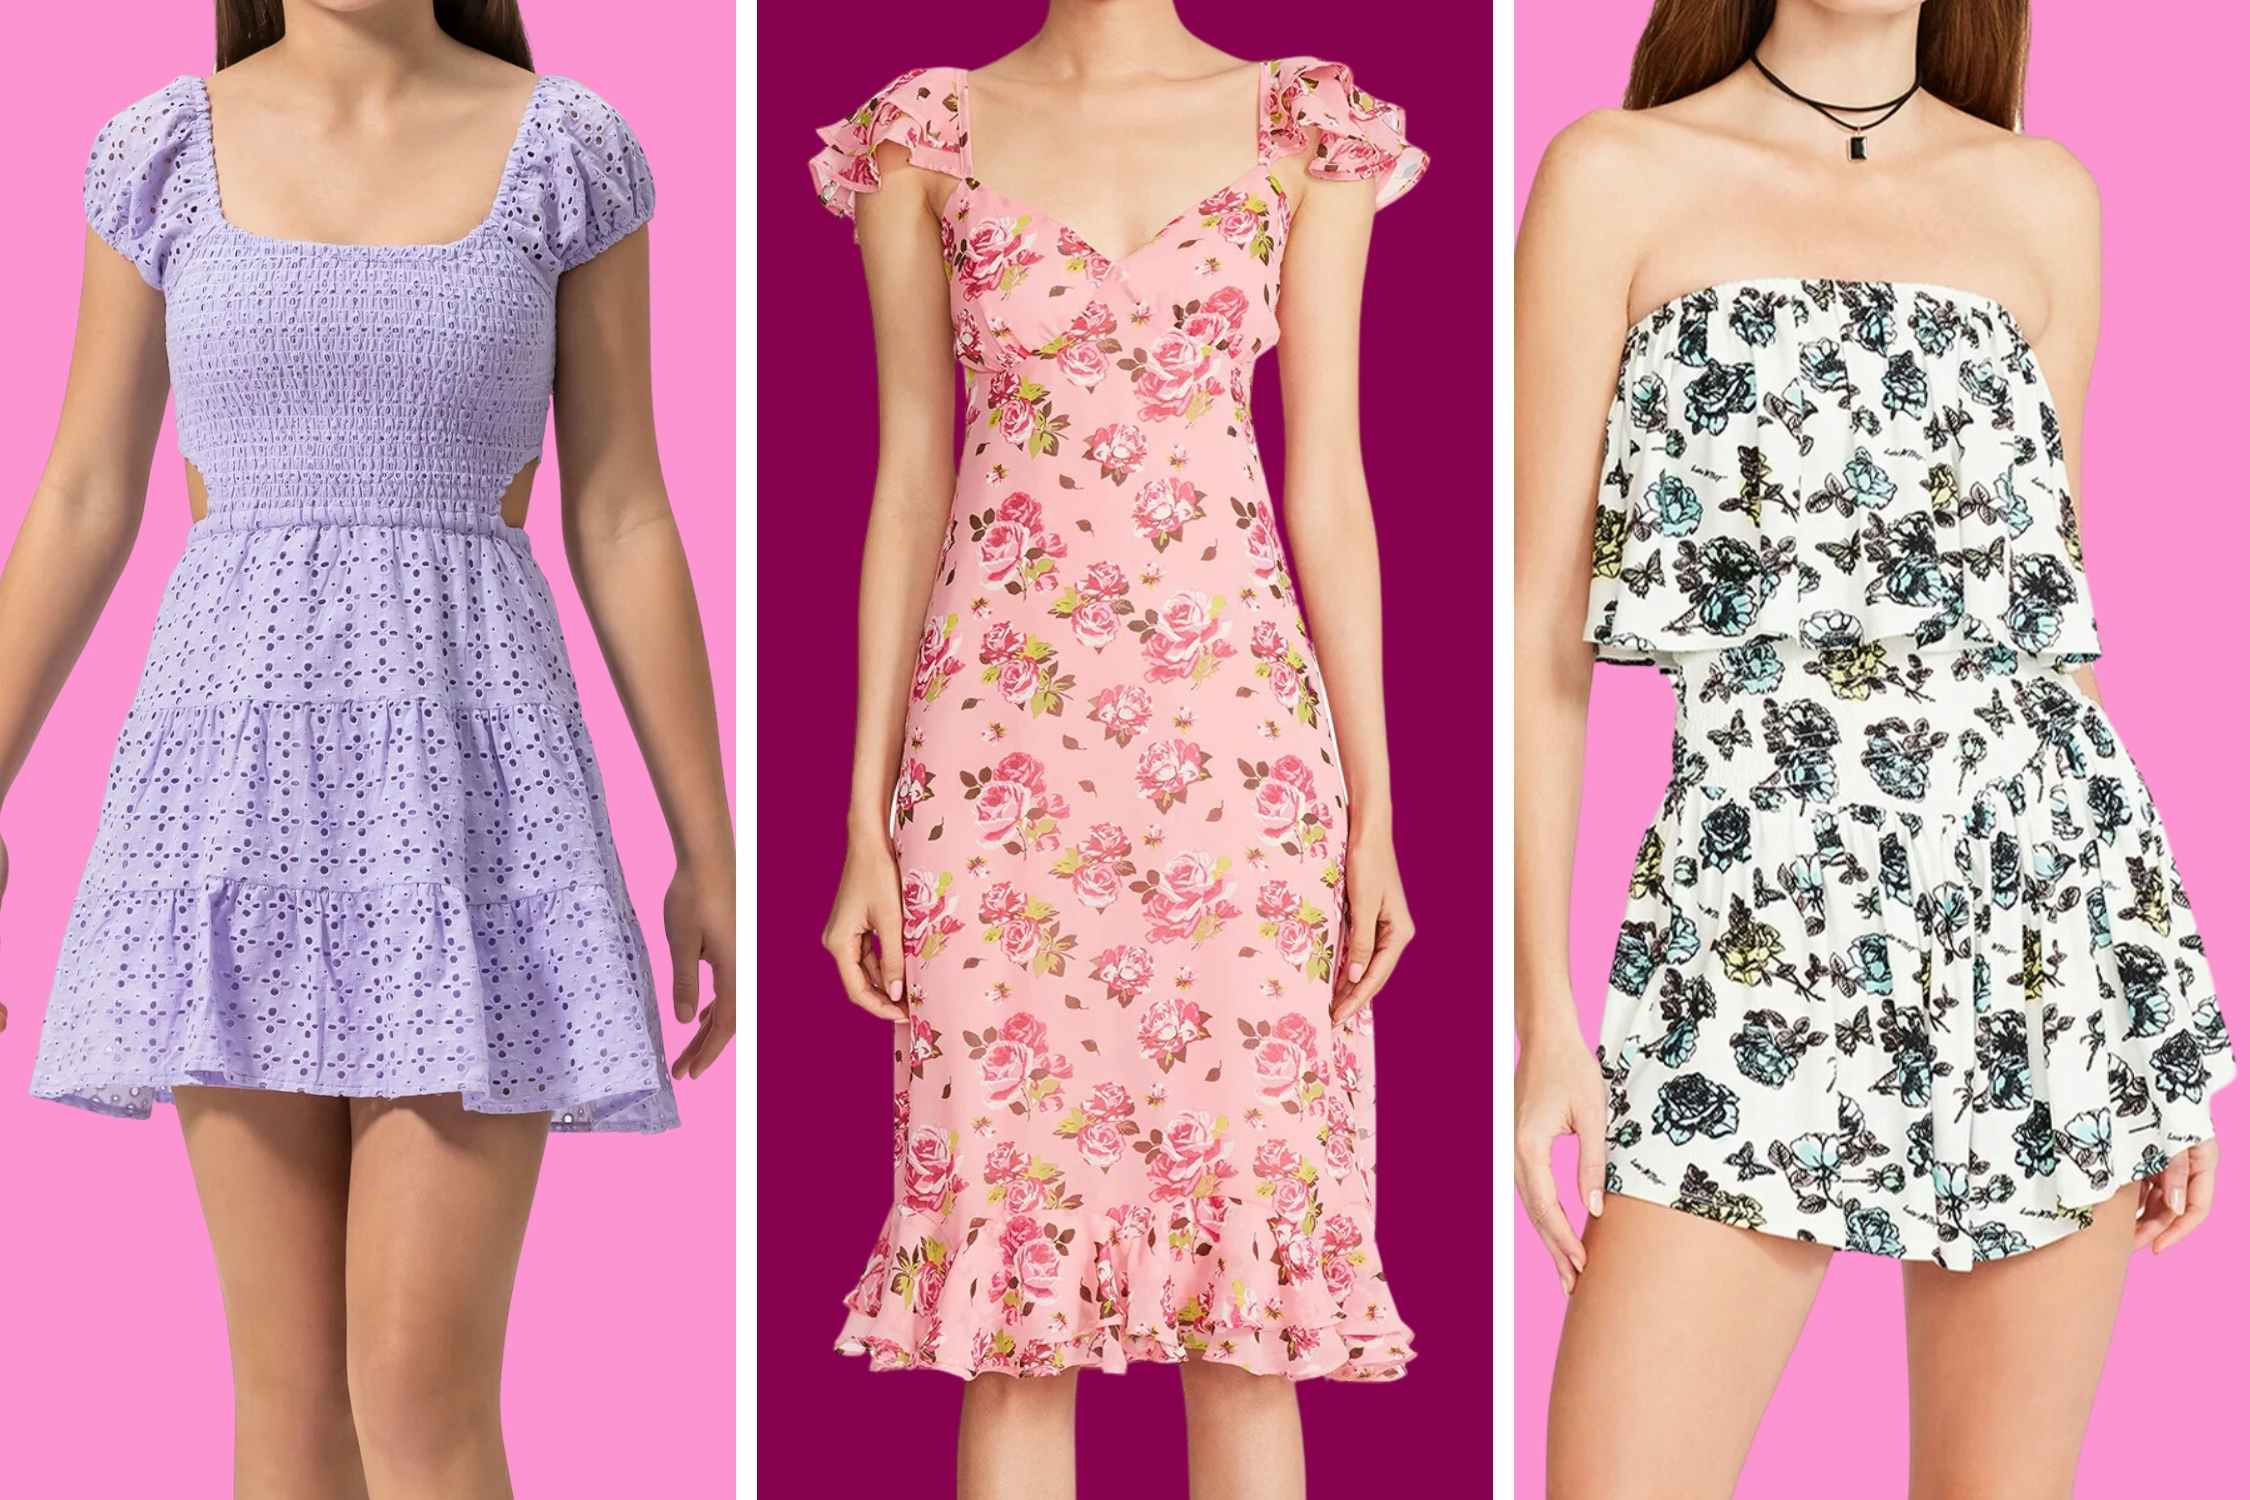 Luv Betsey Clothing Deals for Women Start at $4 and $12 for Kids at Walmart